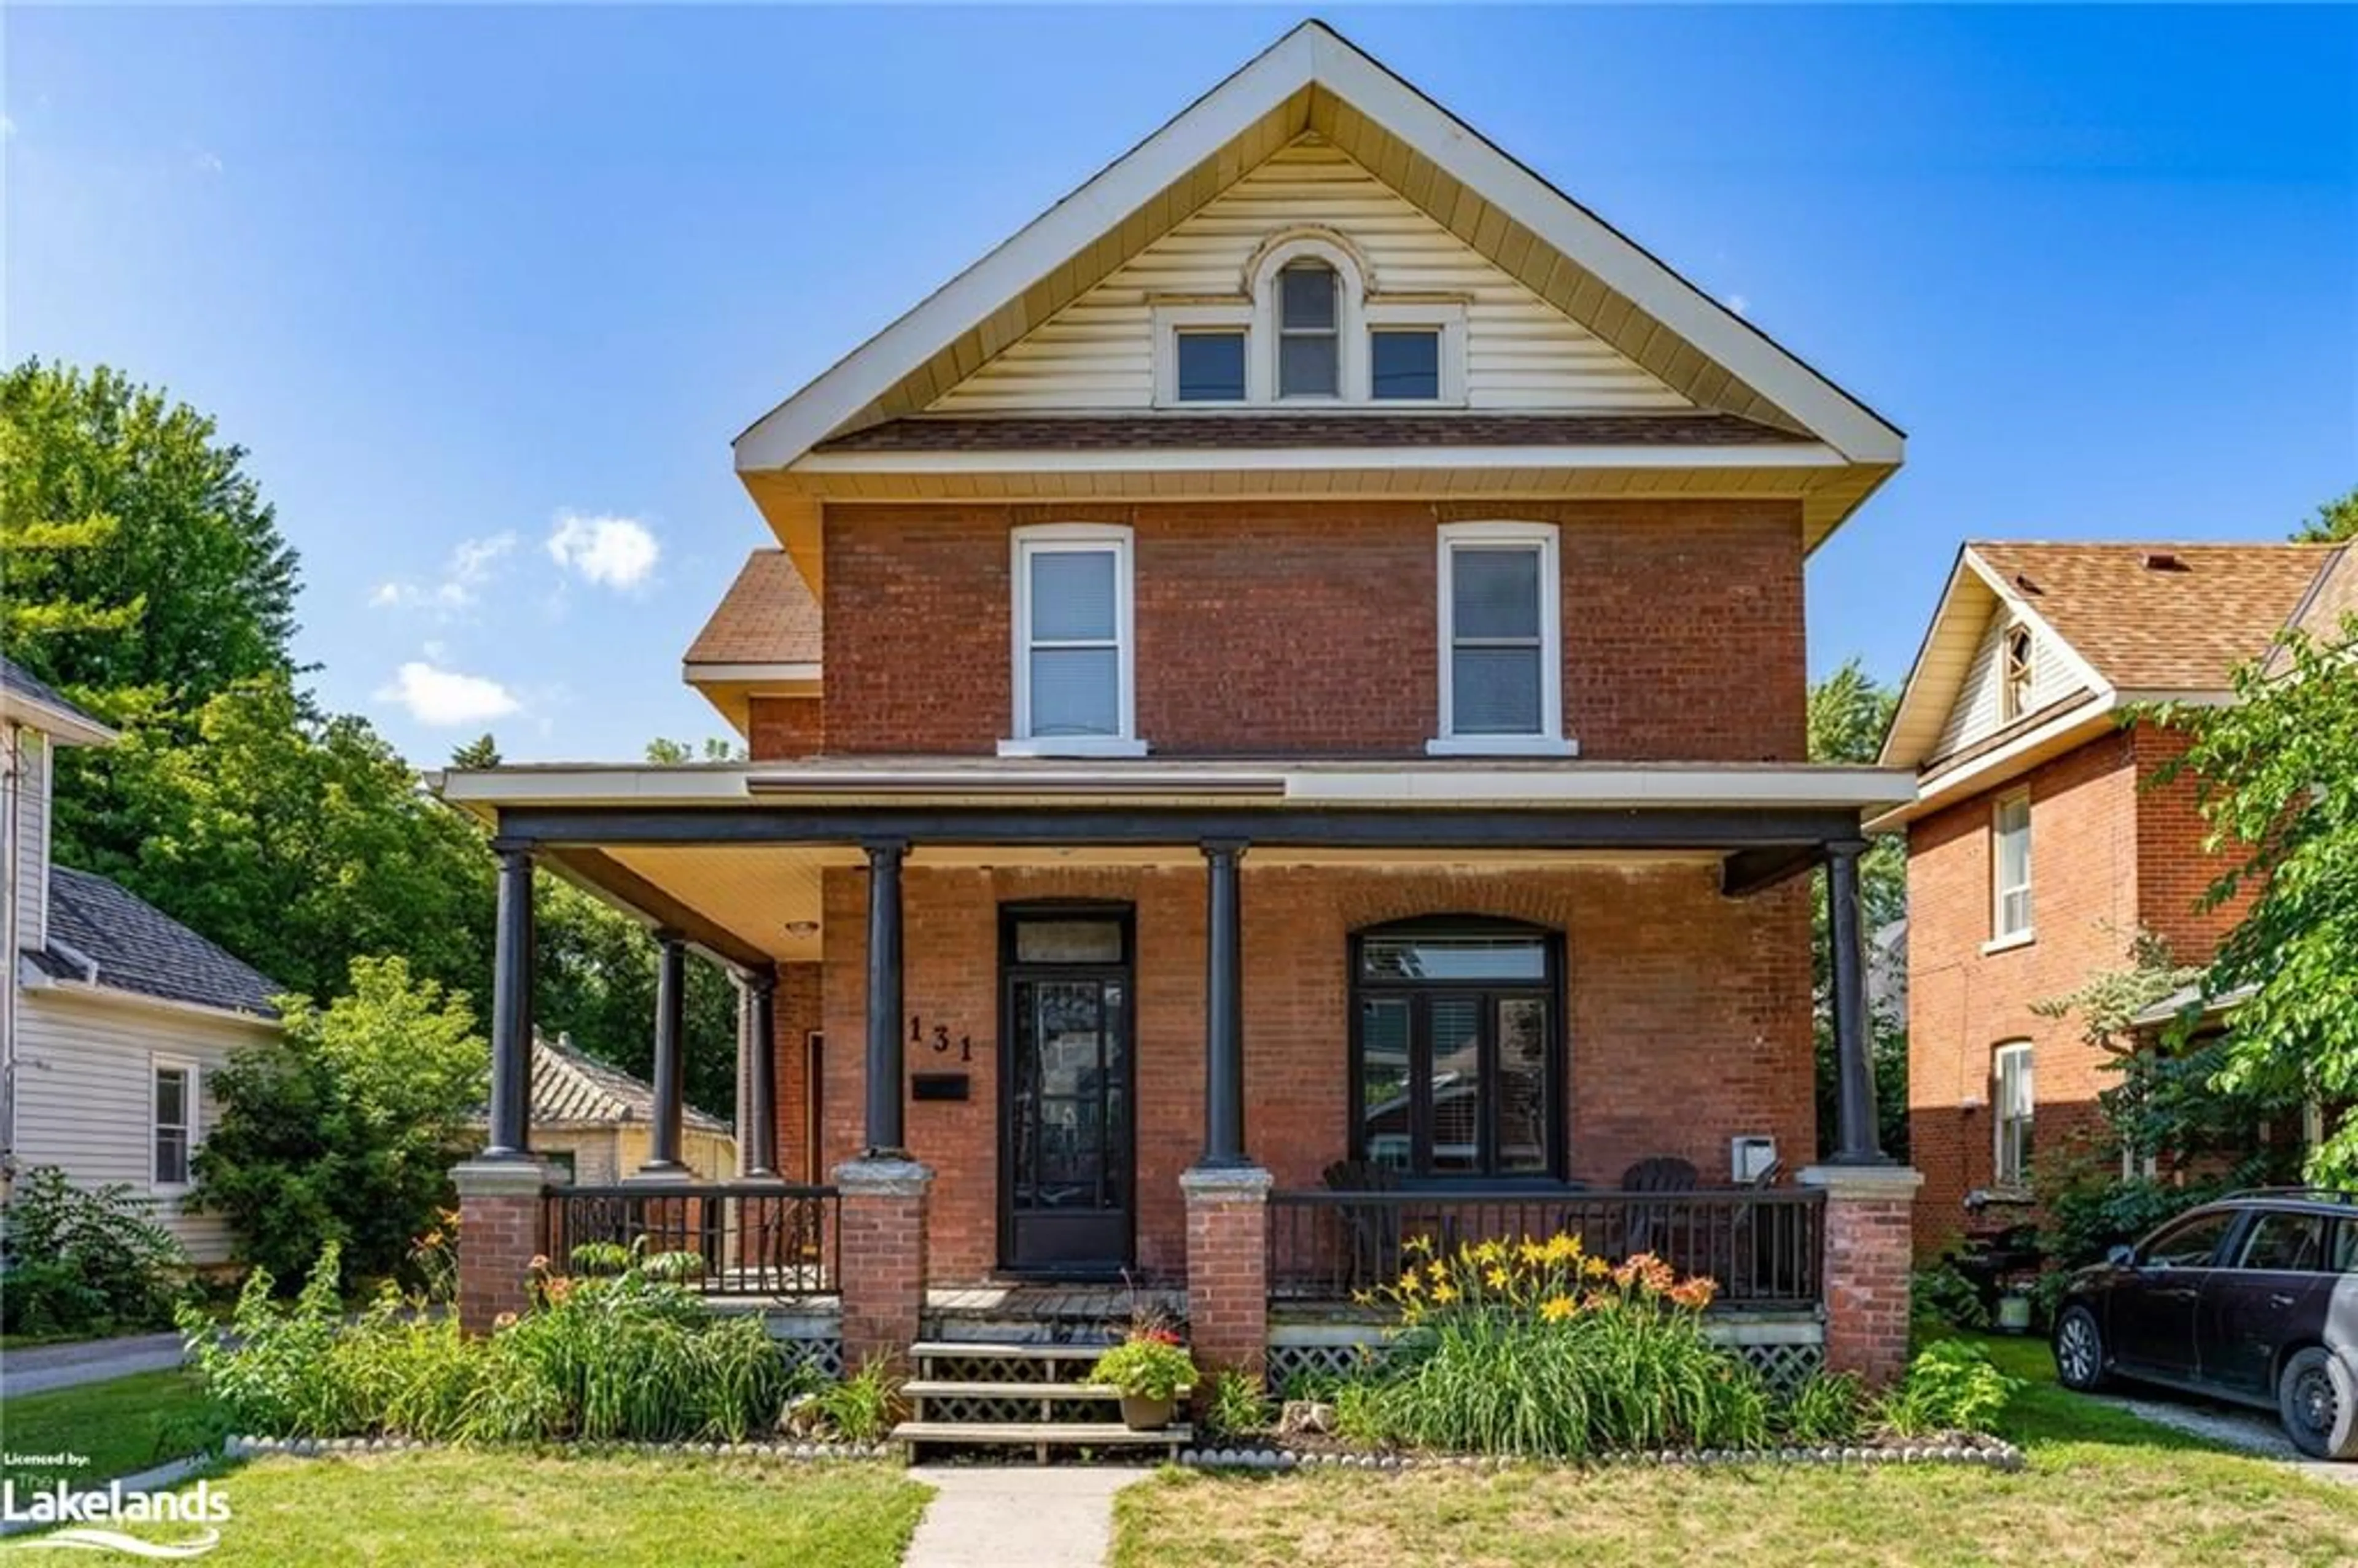 Home with brick exterior material for 131 Fourth St, Collingwood Ontario L9Y 1T6